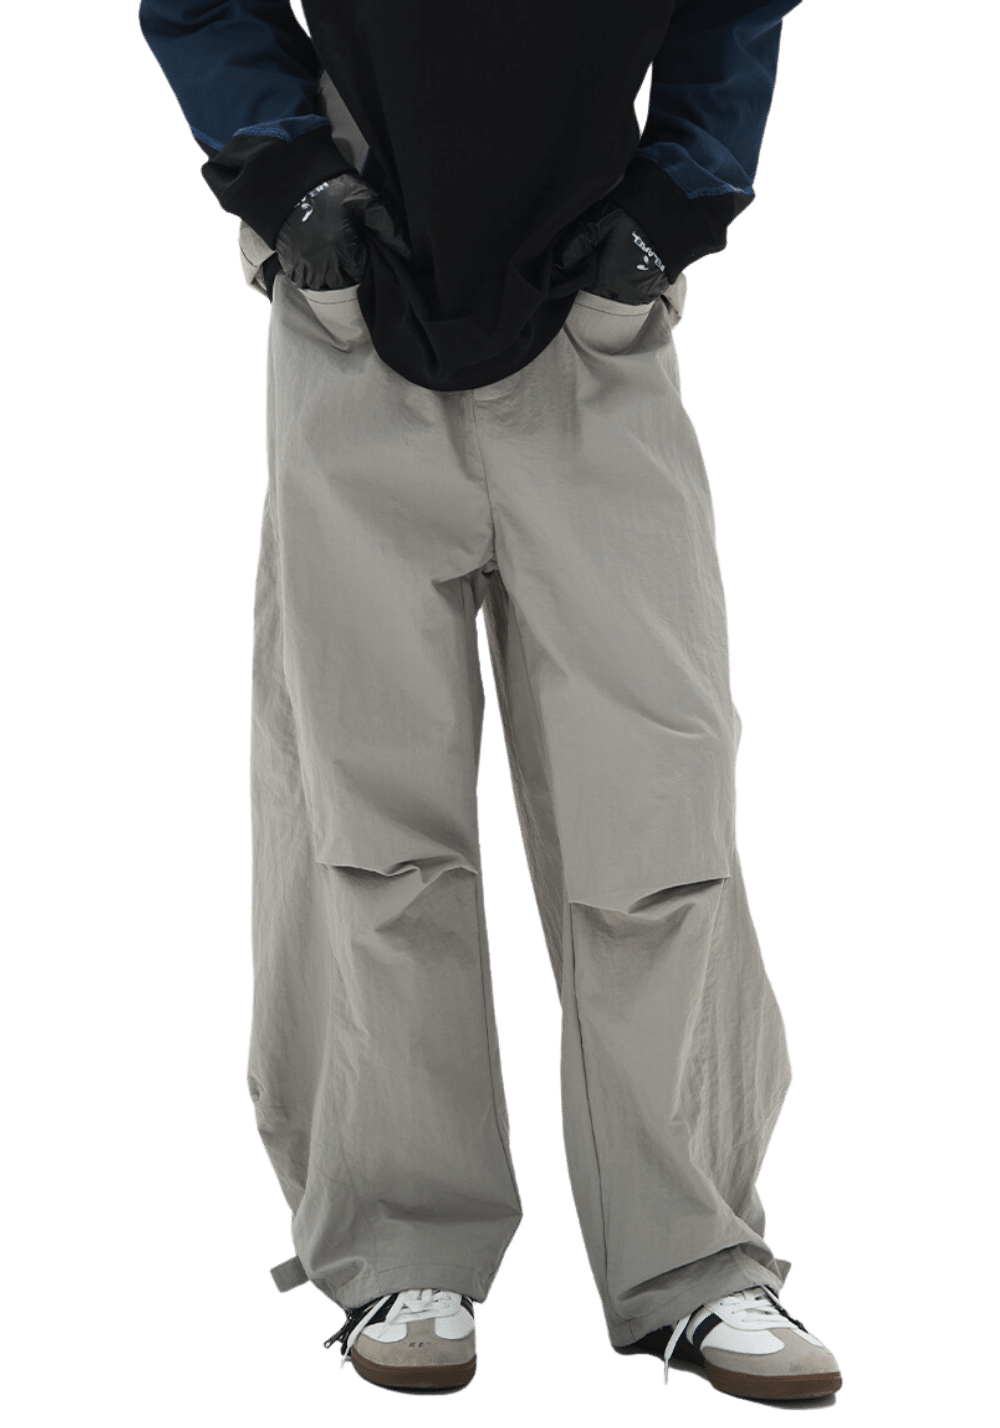 Deconstructed Tapered Wide Leg Pants - PSYLOS 1, Deconstructed Tapered Wide Leg Pants, Pants, RELABEL, PSYLOS 1